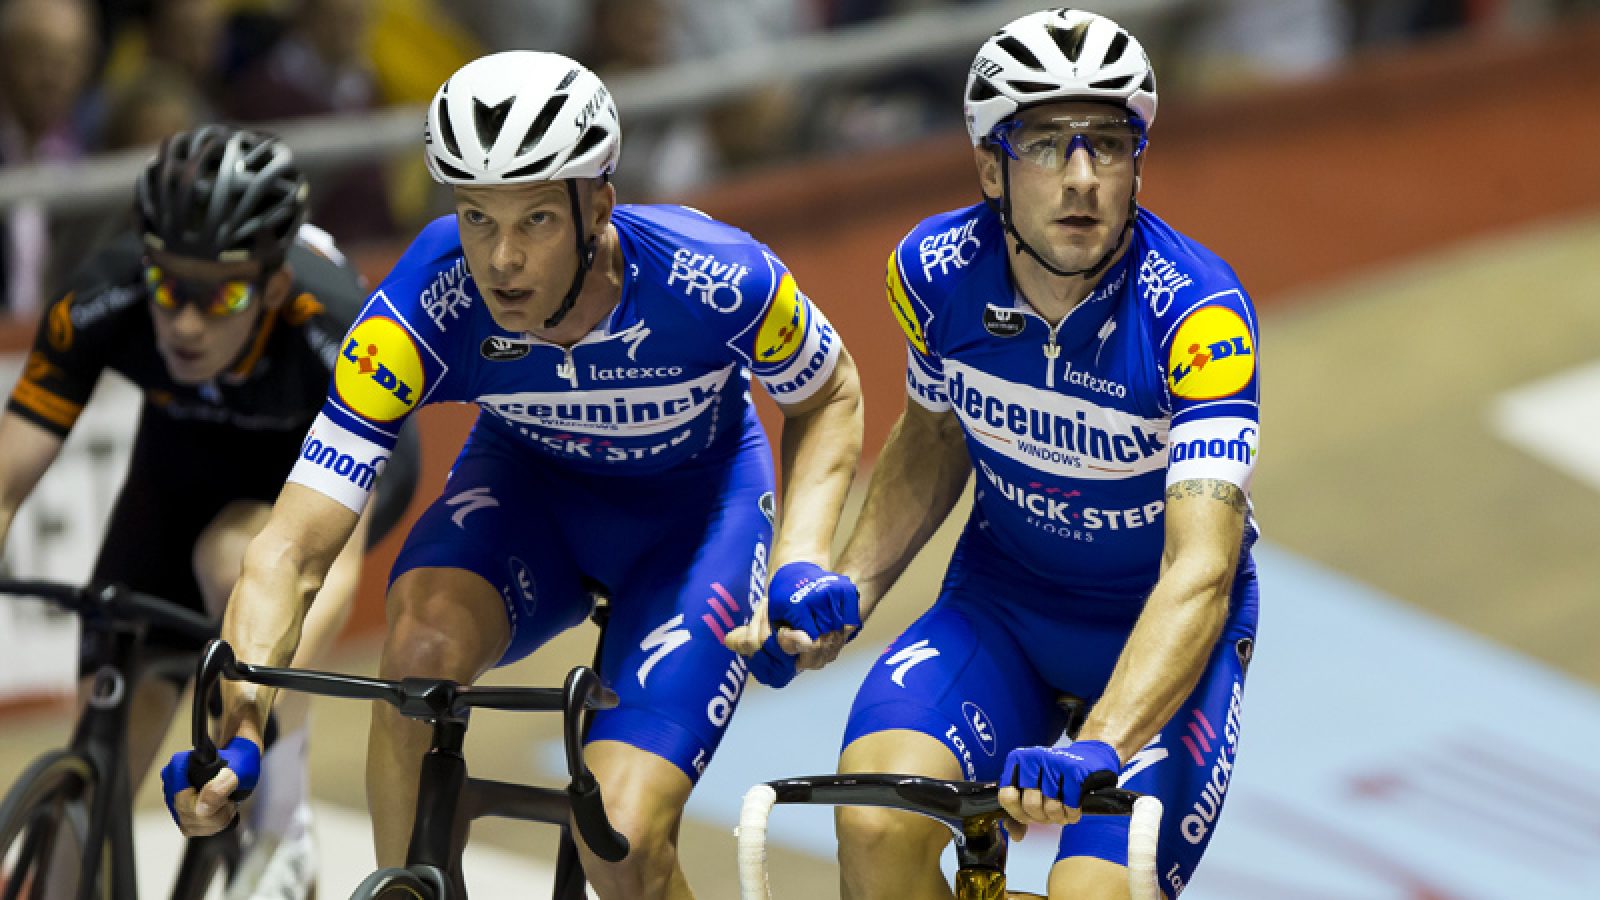 Belgian Iljo Keisse and Italian Elia Viviani pictured during the first day of the Zesdaagse Vlaanderen-Gent six-day indoor cycling race at the indoor cycling arena 't Kuipke, Tuesday 13 November 2018, in Gent. This year's edition takes place from November 13th until November 18th. BELGA PHOTO KRISTOF VAN ACCOM